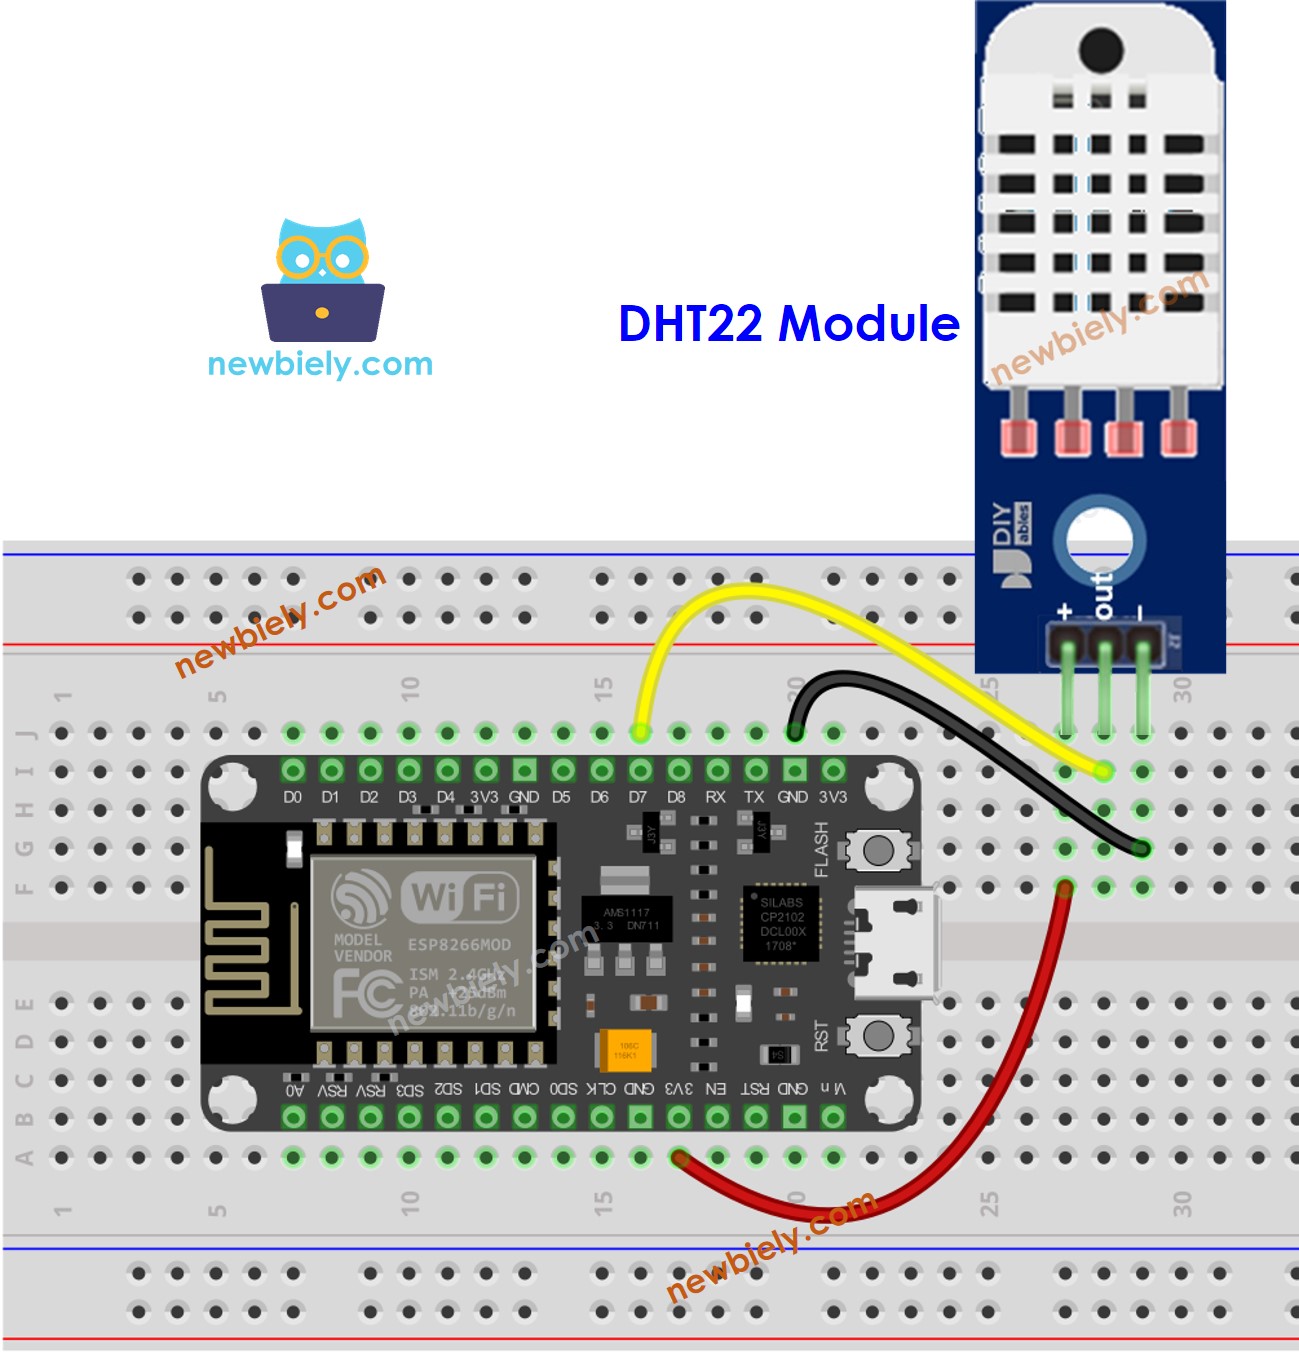 The wiring diagram between ESP8266 NodeMCU and DHT22 Temperature and humidity Module